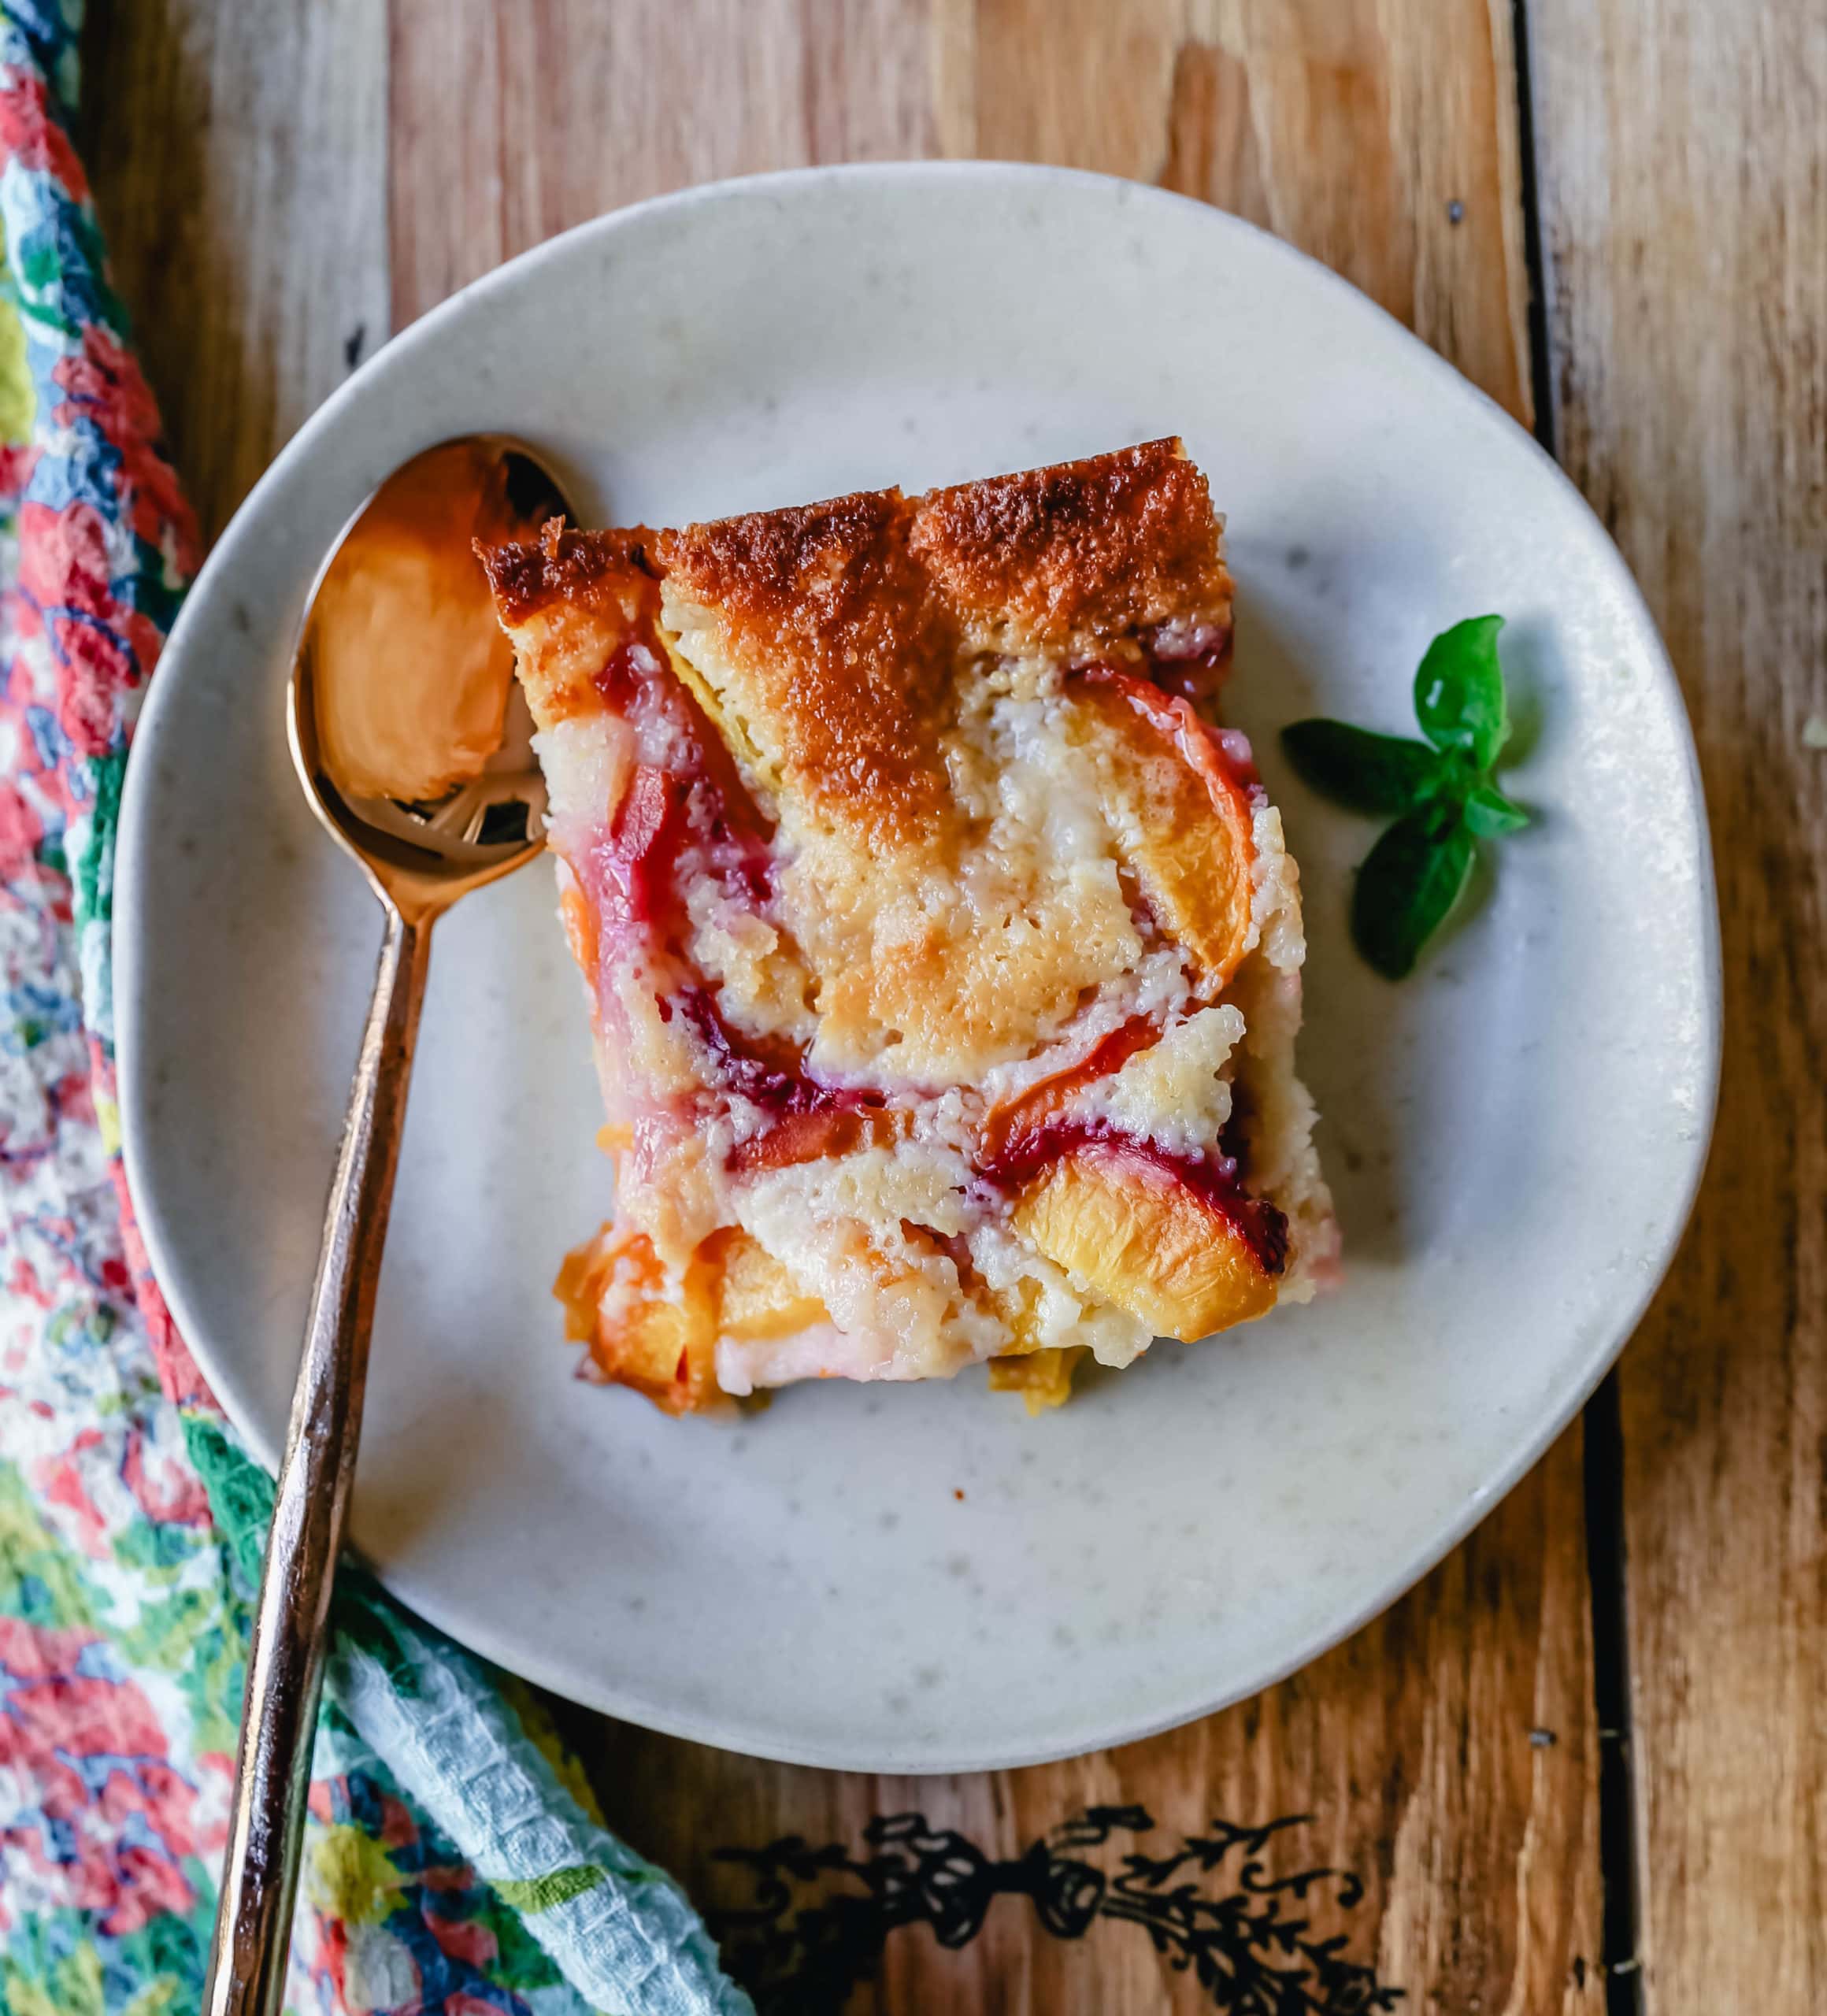 Texas Style Peach Cobbler. Fresh peaches sweetened with sugar and topped with a creamy buttery cake-like topping. A Texas favorite dessert!  #peaches #peachdessert #peachcobbler